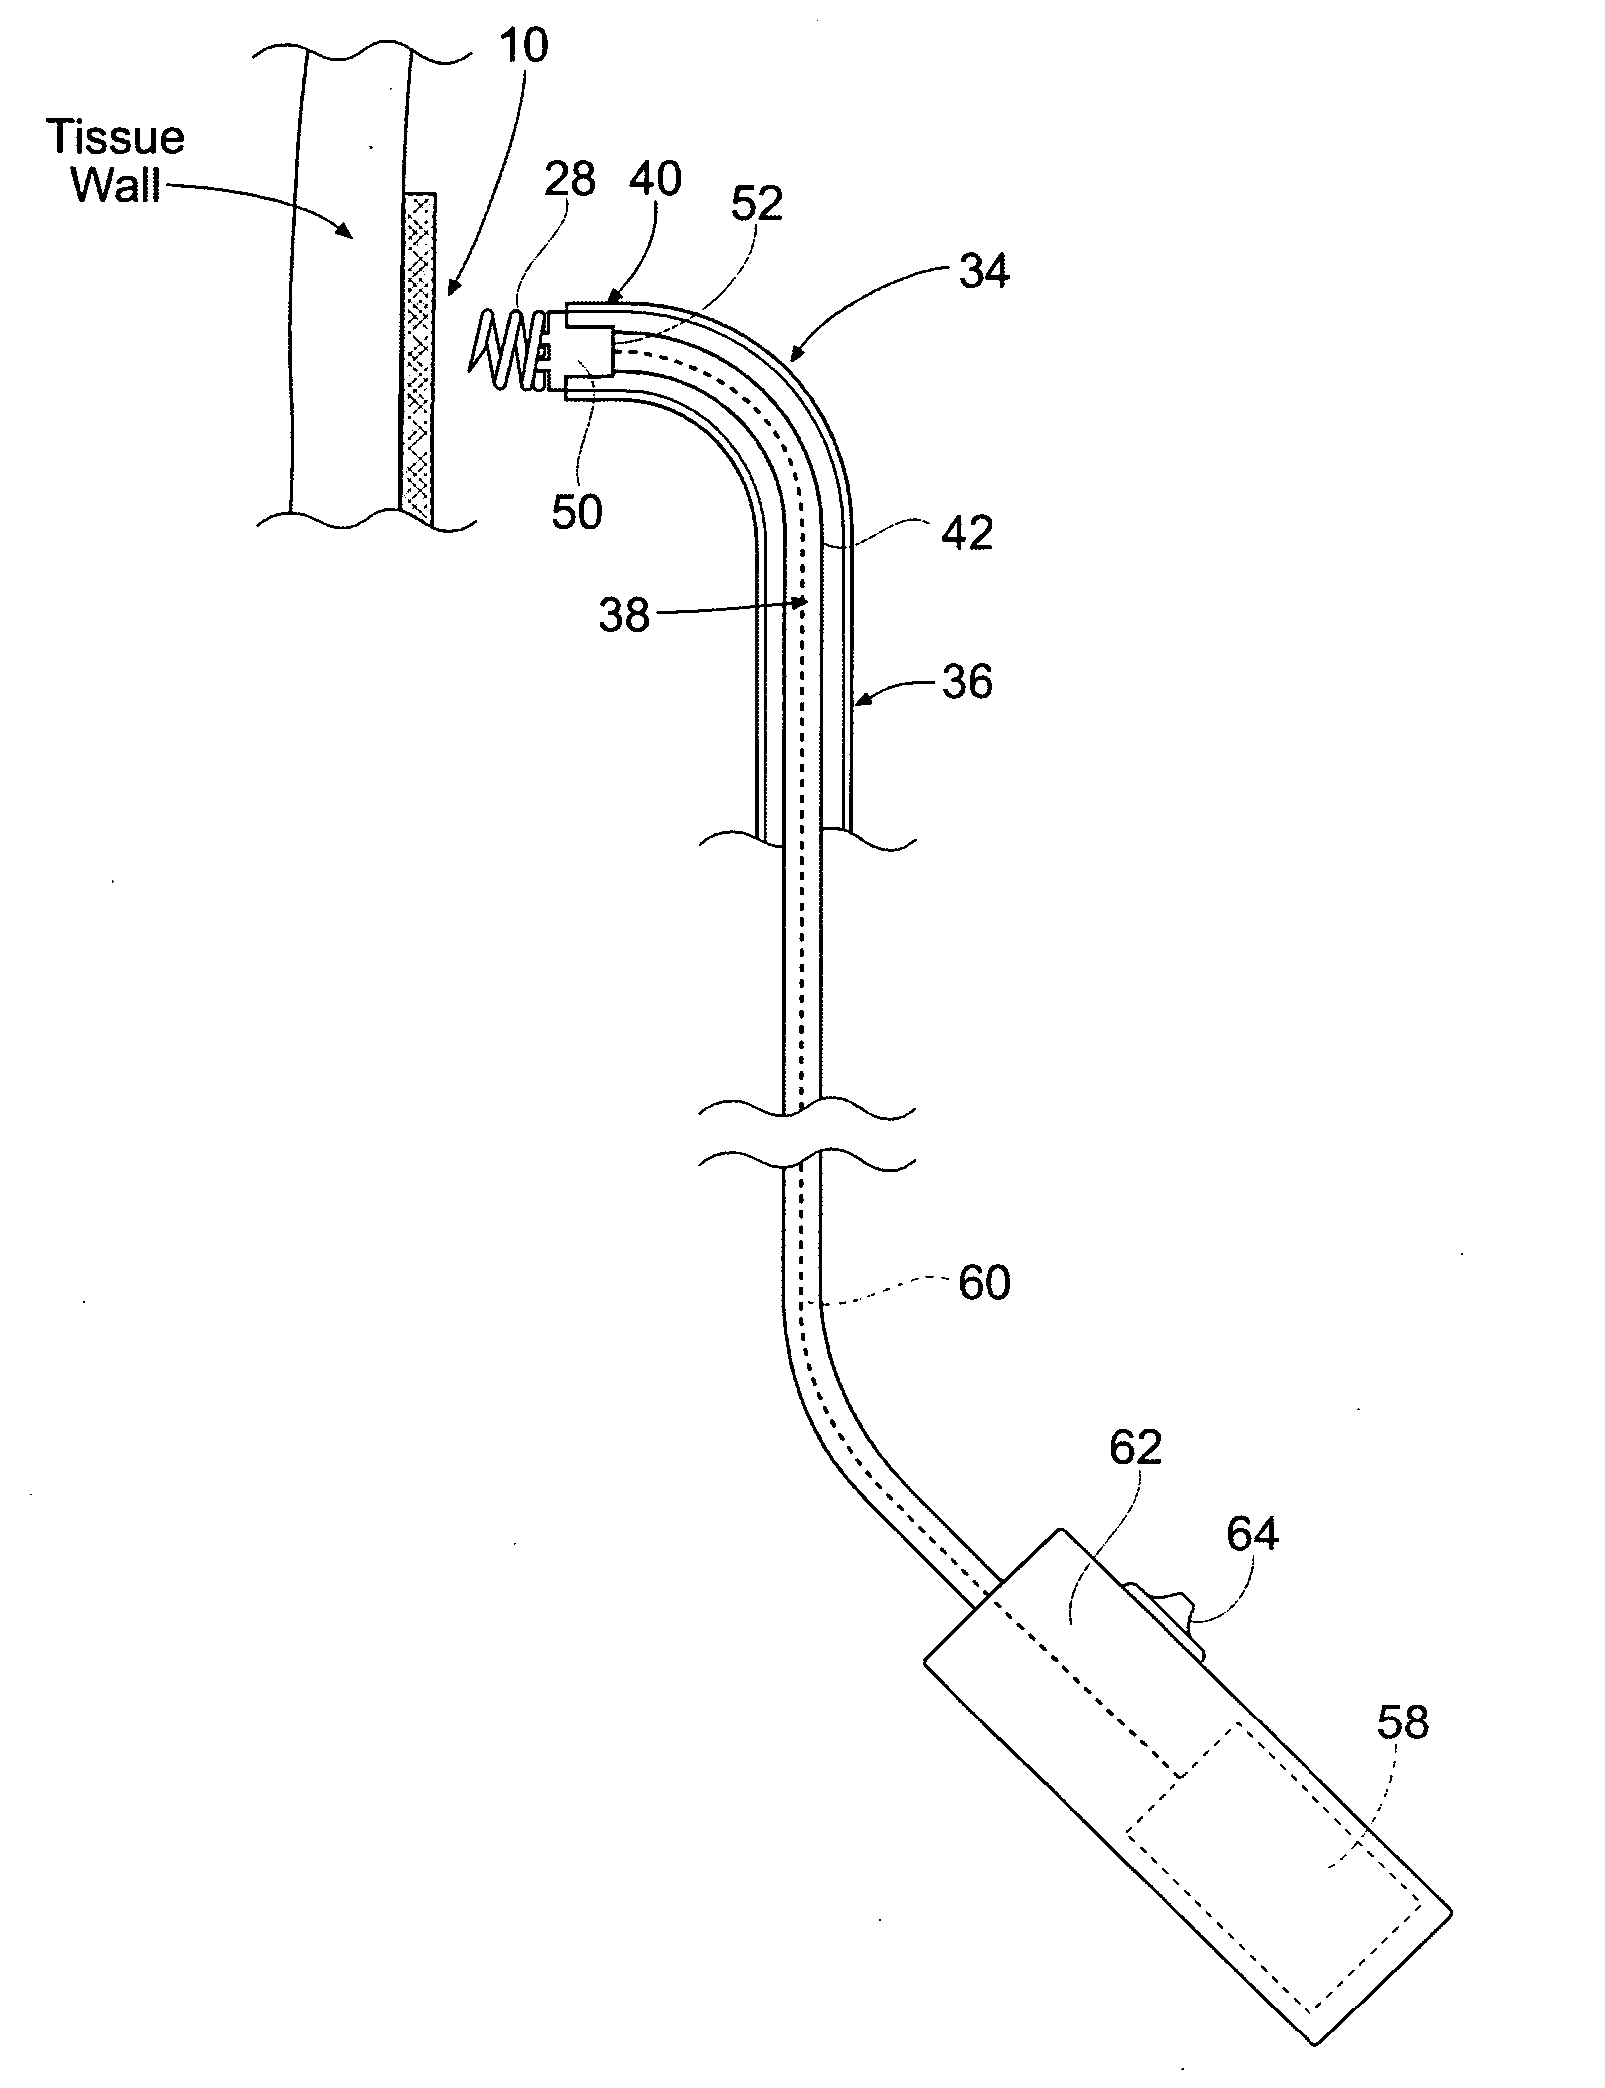 Systems and methods for attaching a prosthesis within a body lumen or hollow organ